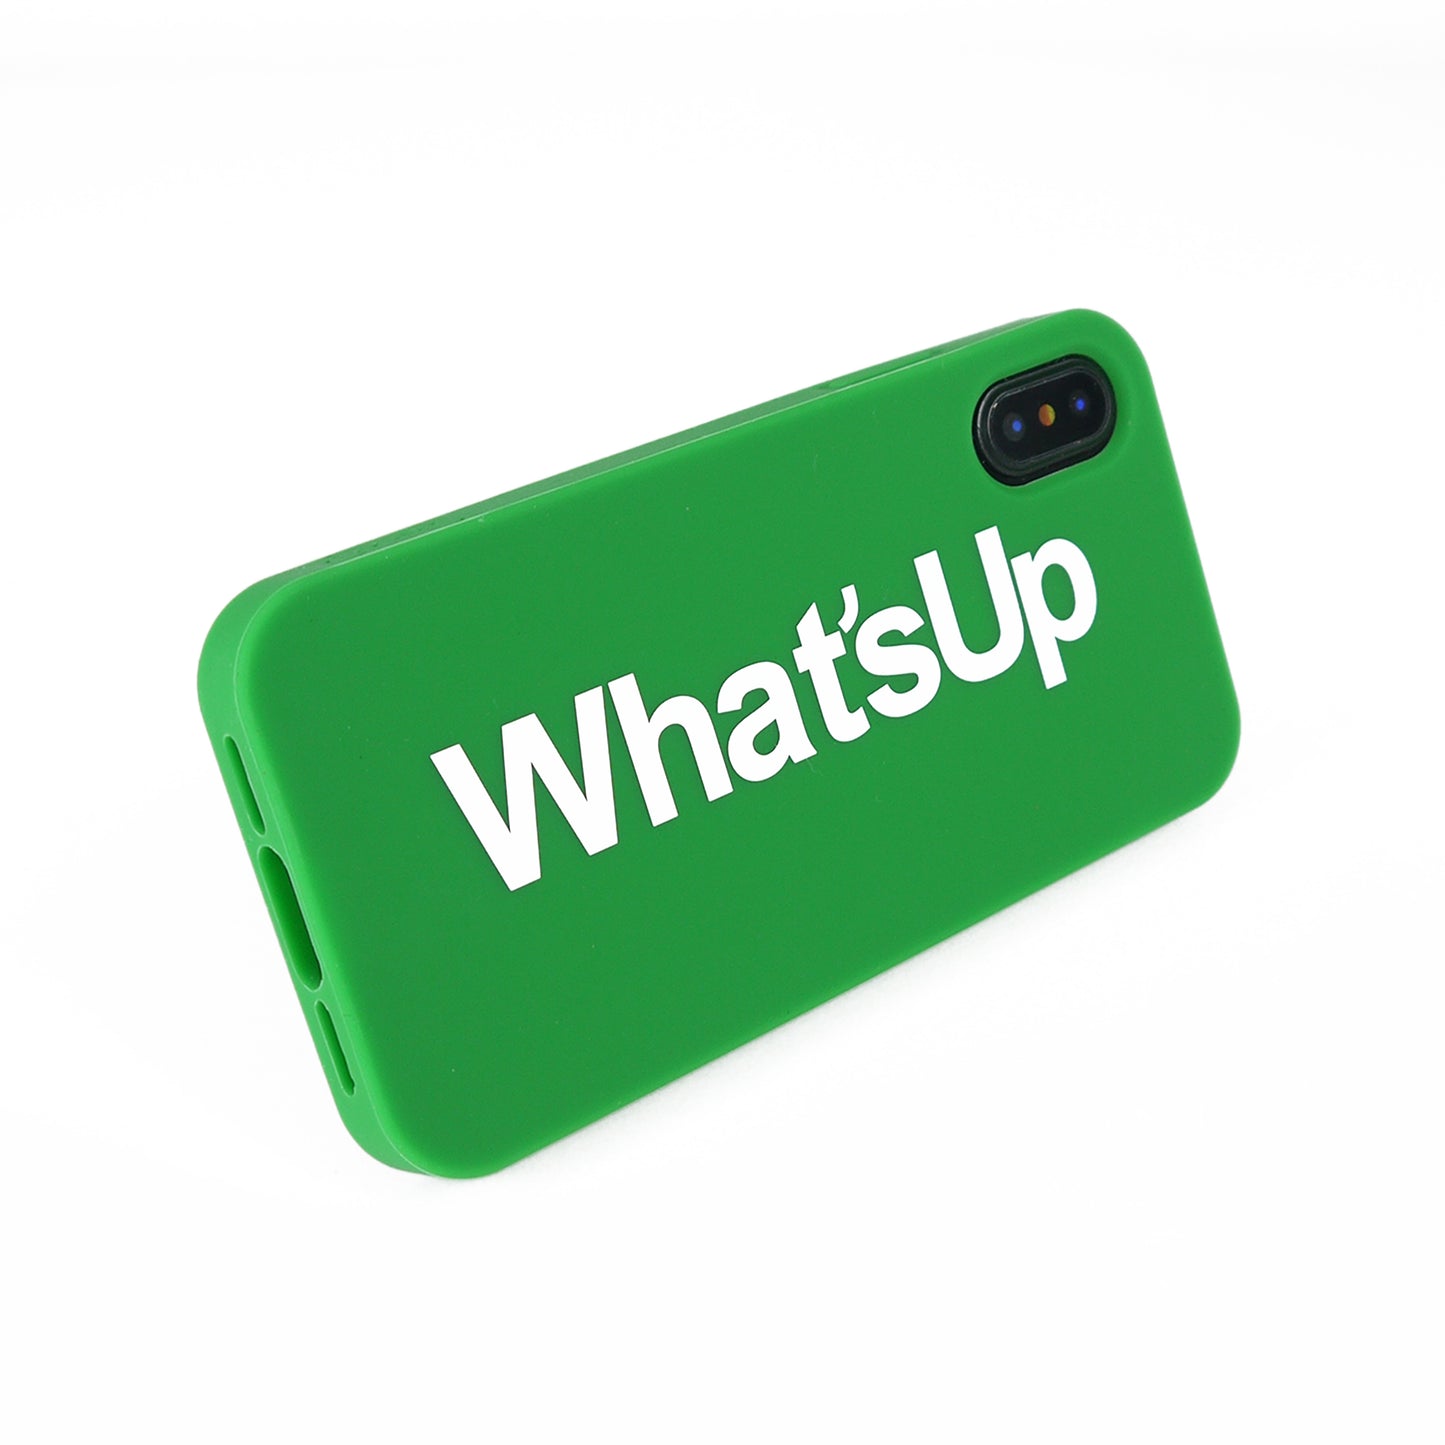 iPhone X/Xs Simple Case - What's Up